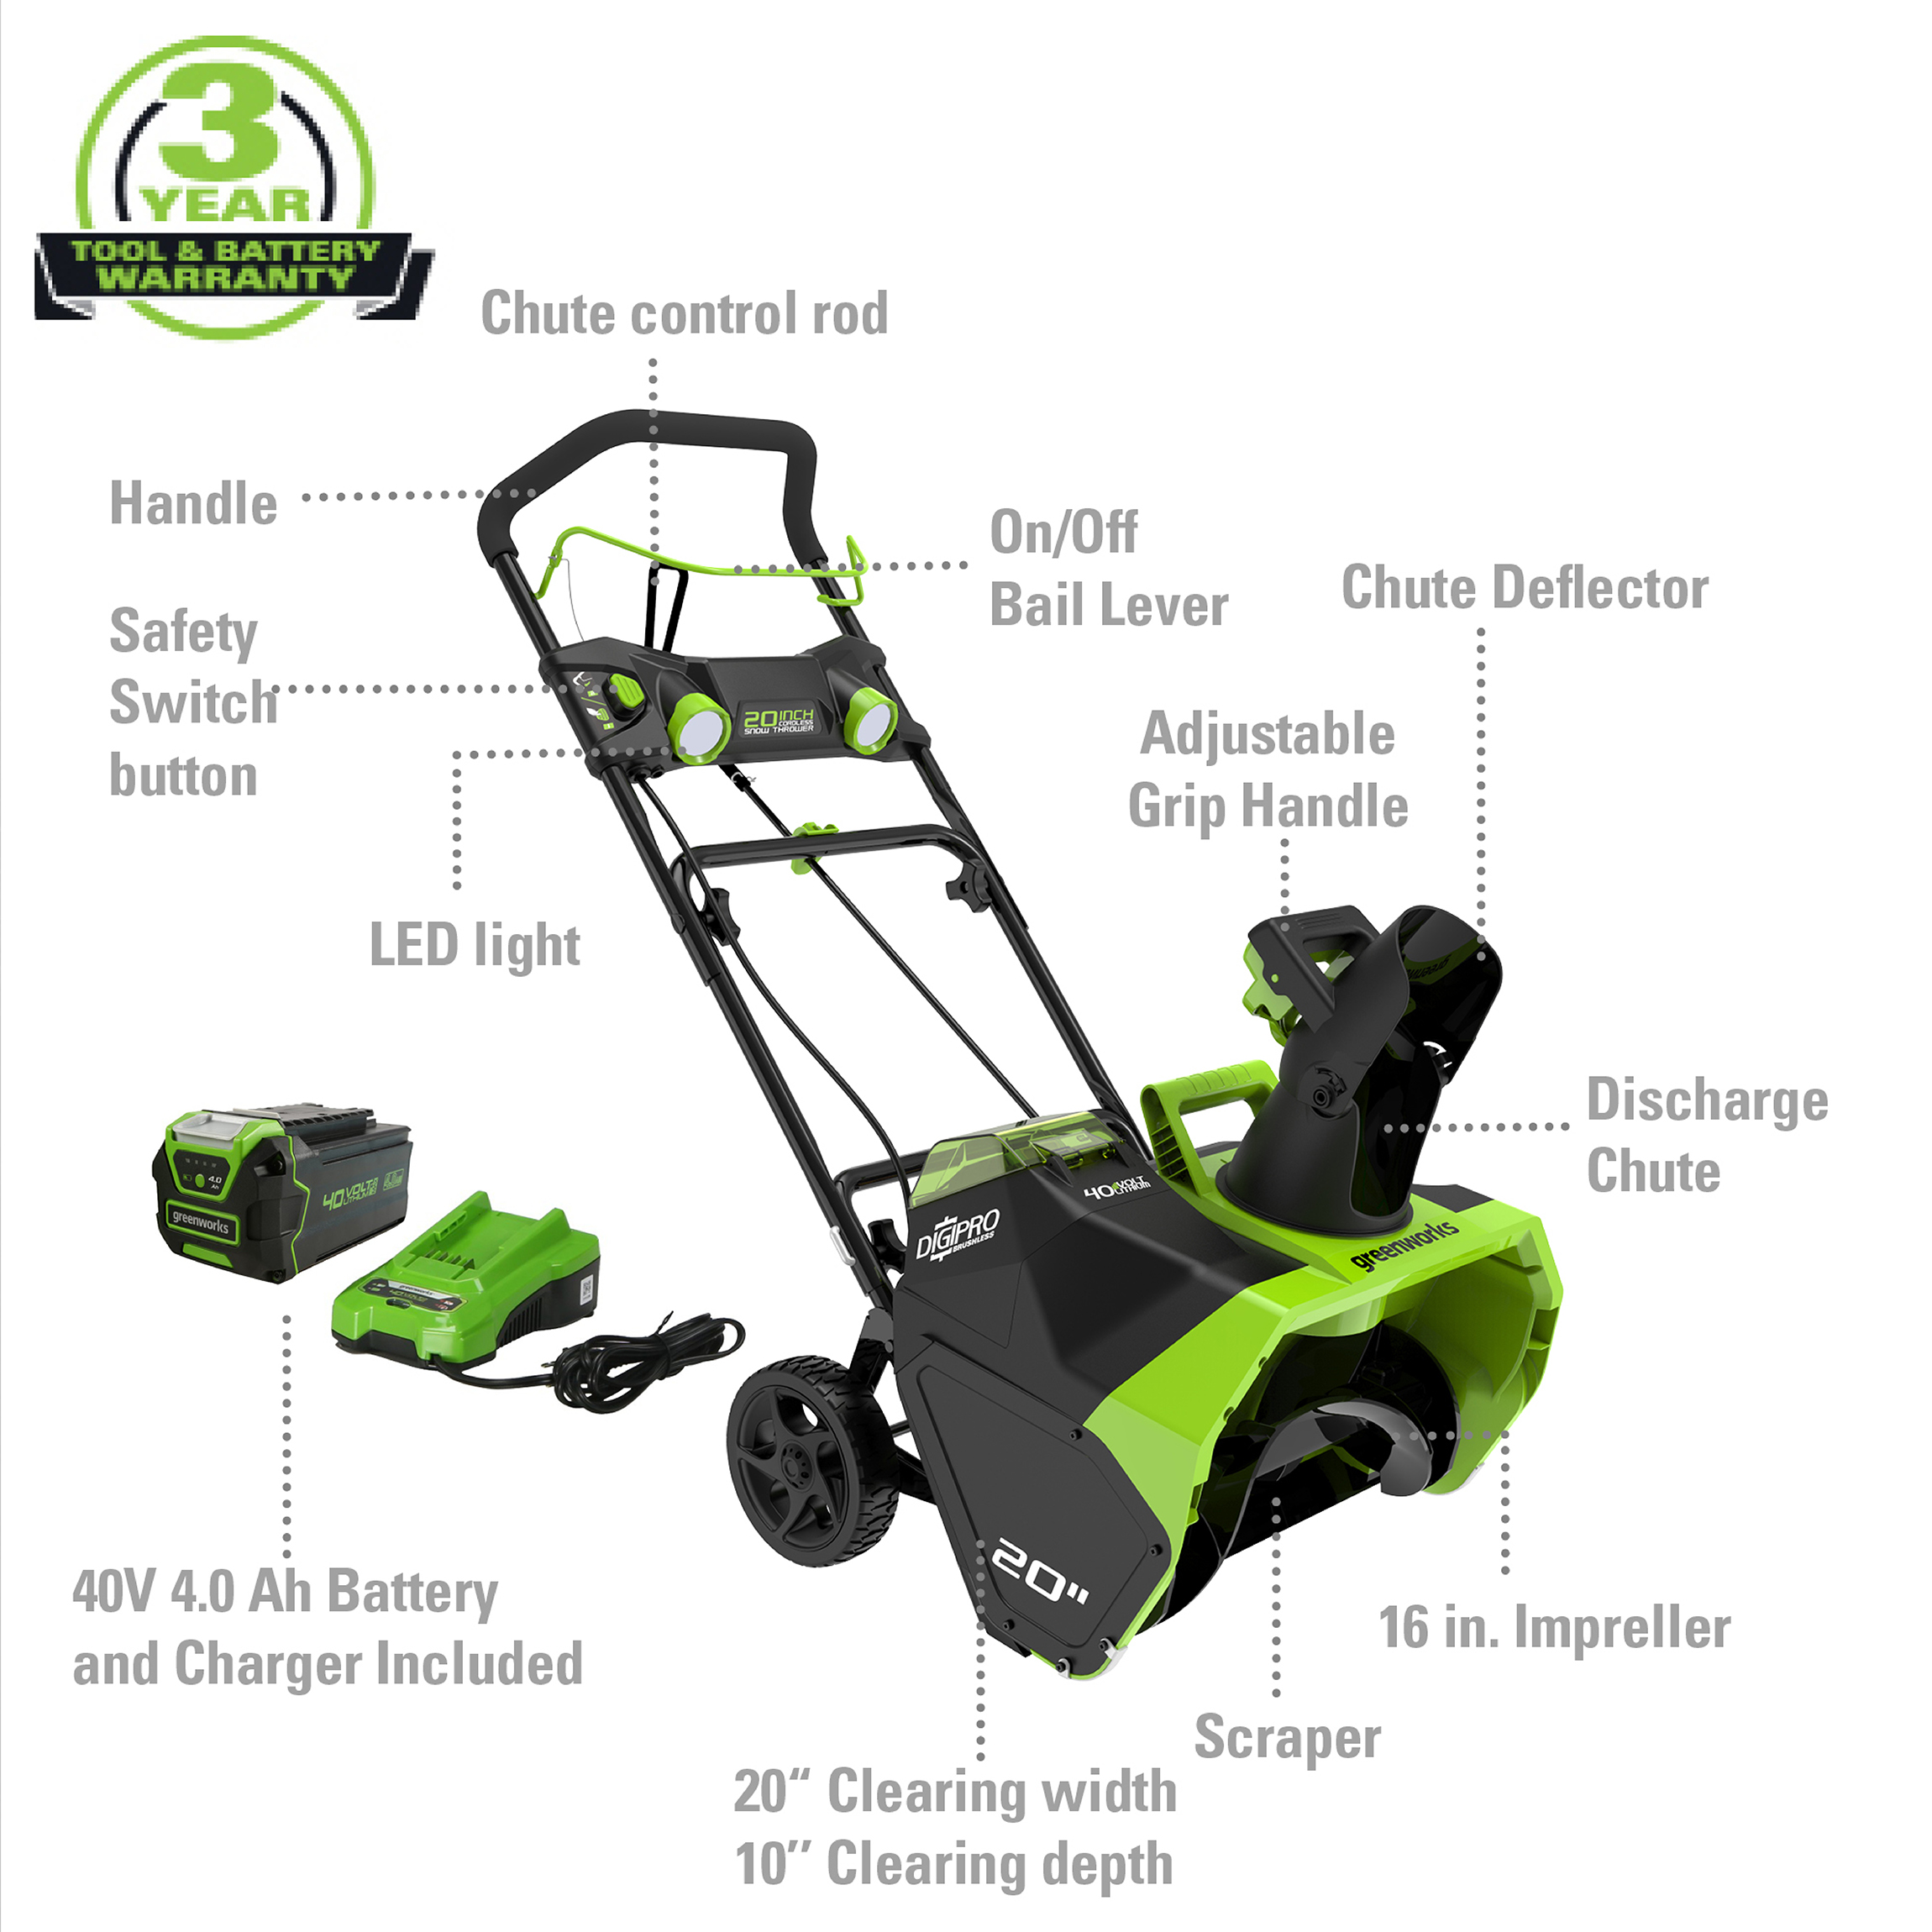 Greenworks 40V 20" Cordless Brushless Snow Blower + (1) 4.0 Ah Battery and Charger 26272 - image 2 of 9